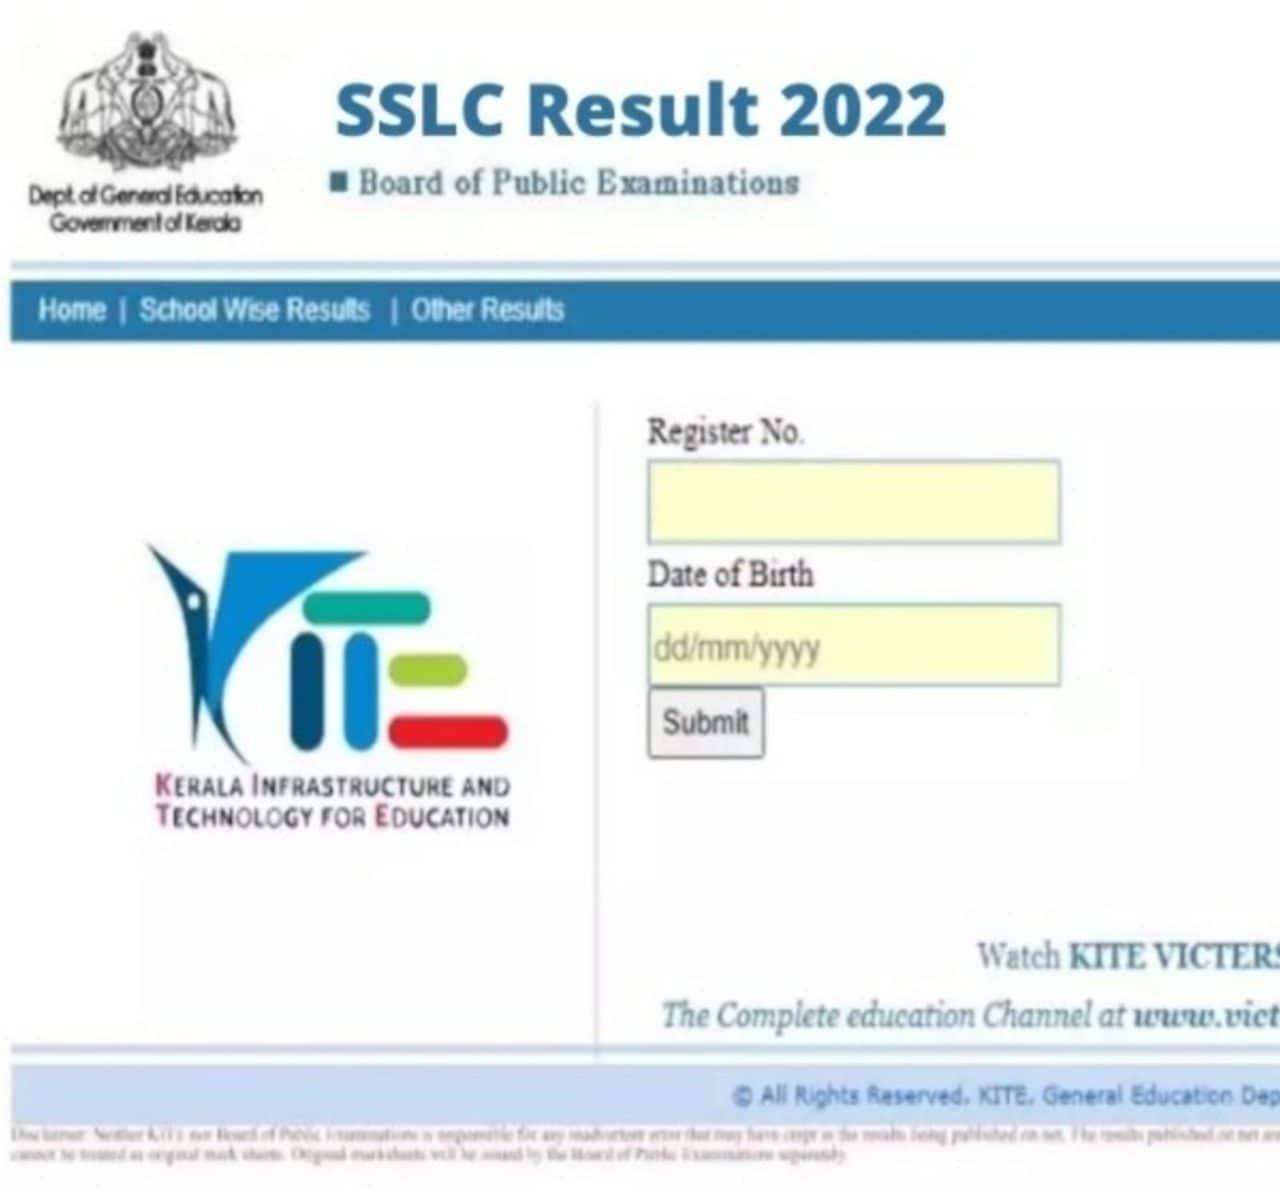 Kerala SSLC Class 10 Results 2024 Out: Here's How to Check Online, via SMS, and DigiLocker